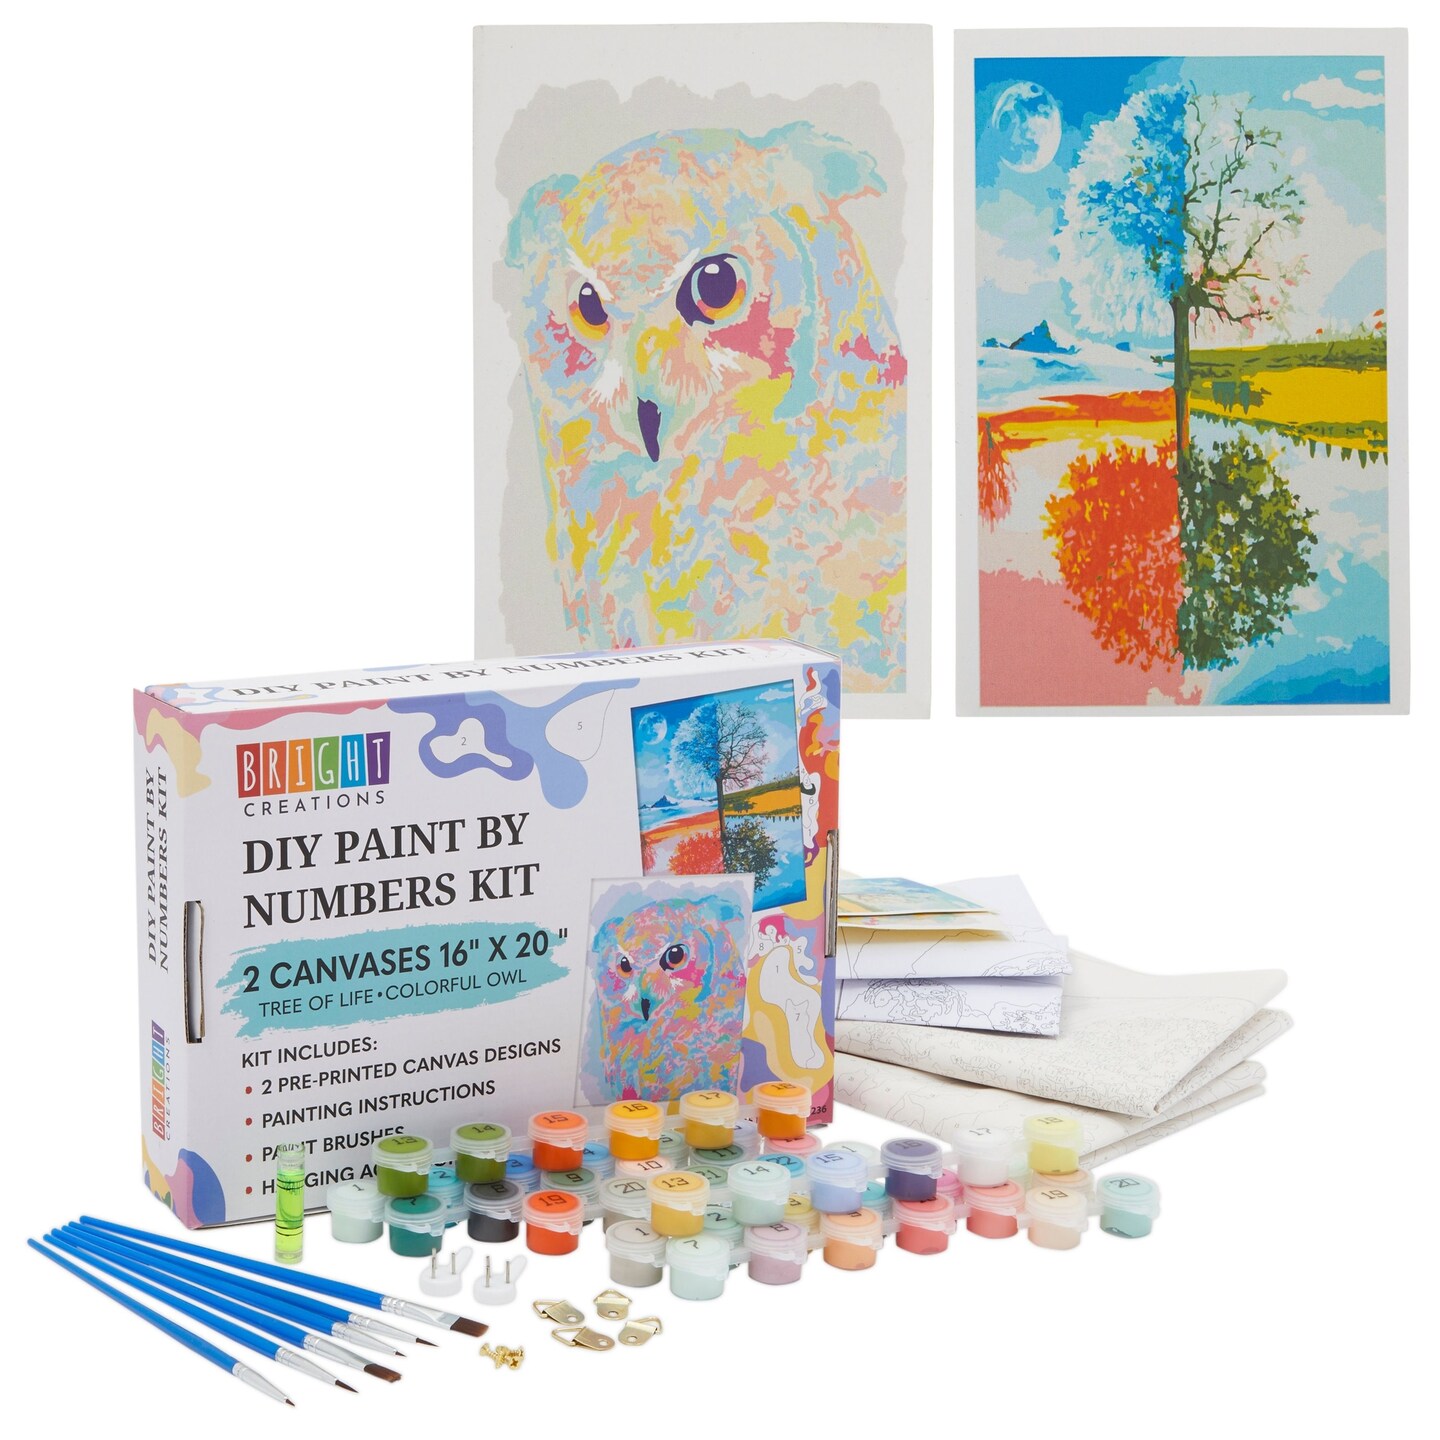 Lartique Canvases for Painting – 43 Piece Painting Canvas, Painting Supplies,  Paint Kit – Painting Kit Includes Canvas Boards for Painting - Works with  Acrylic, Oil, Pastel and Watercolor Paint